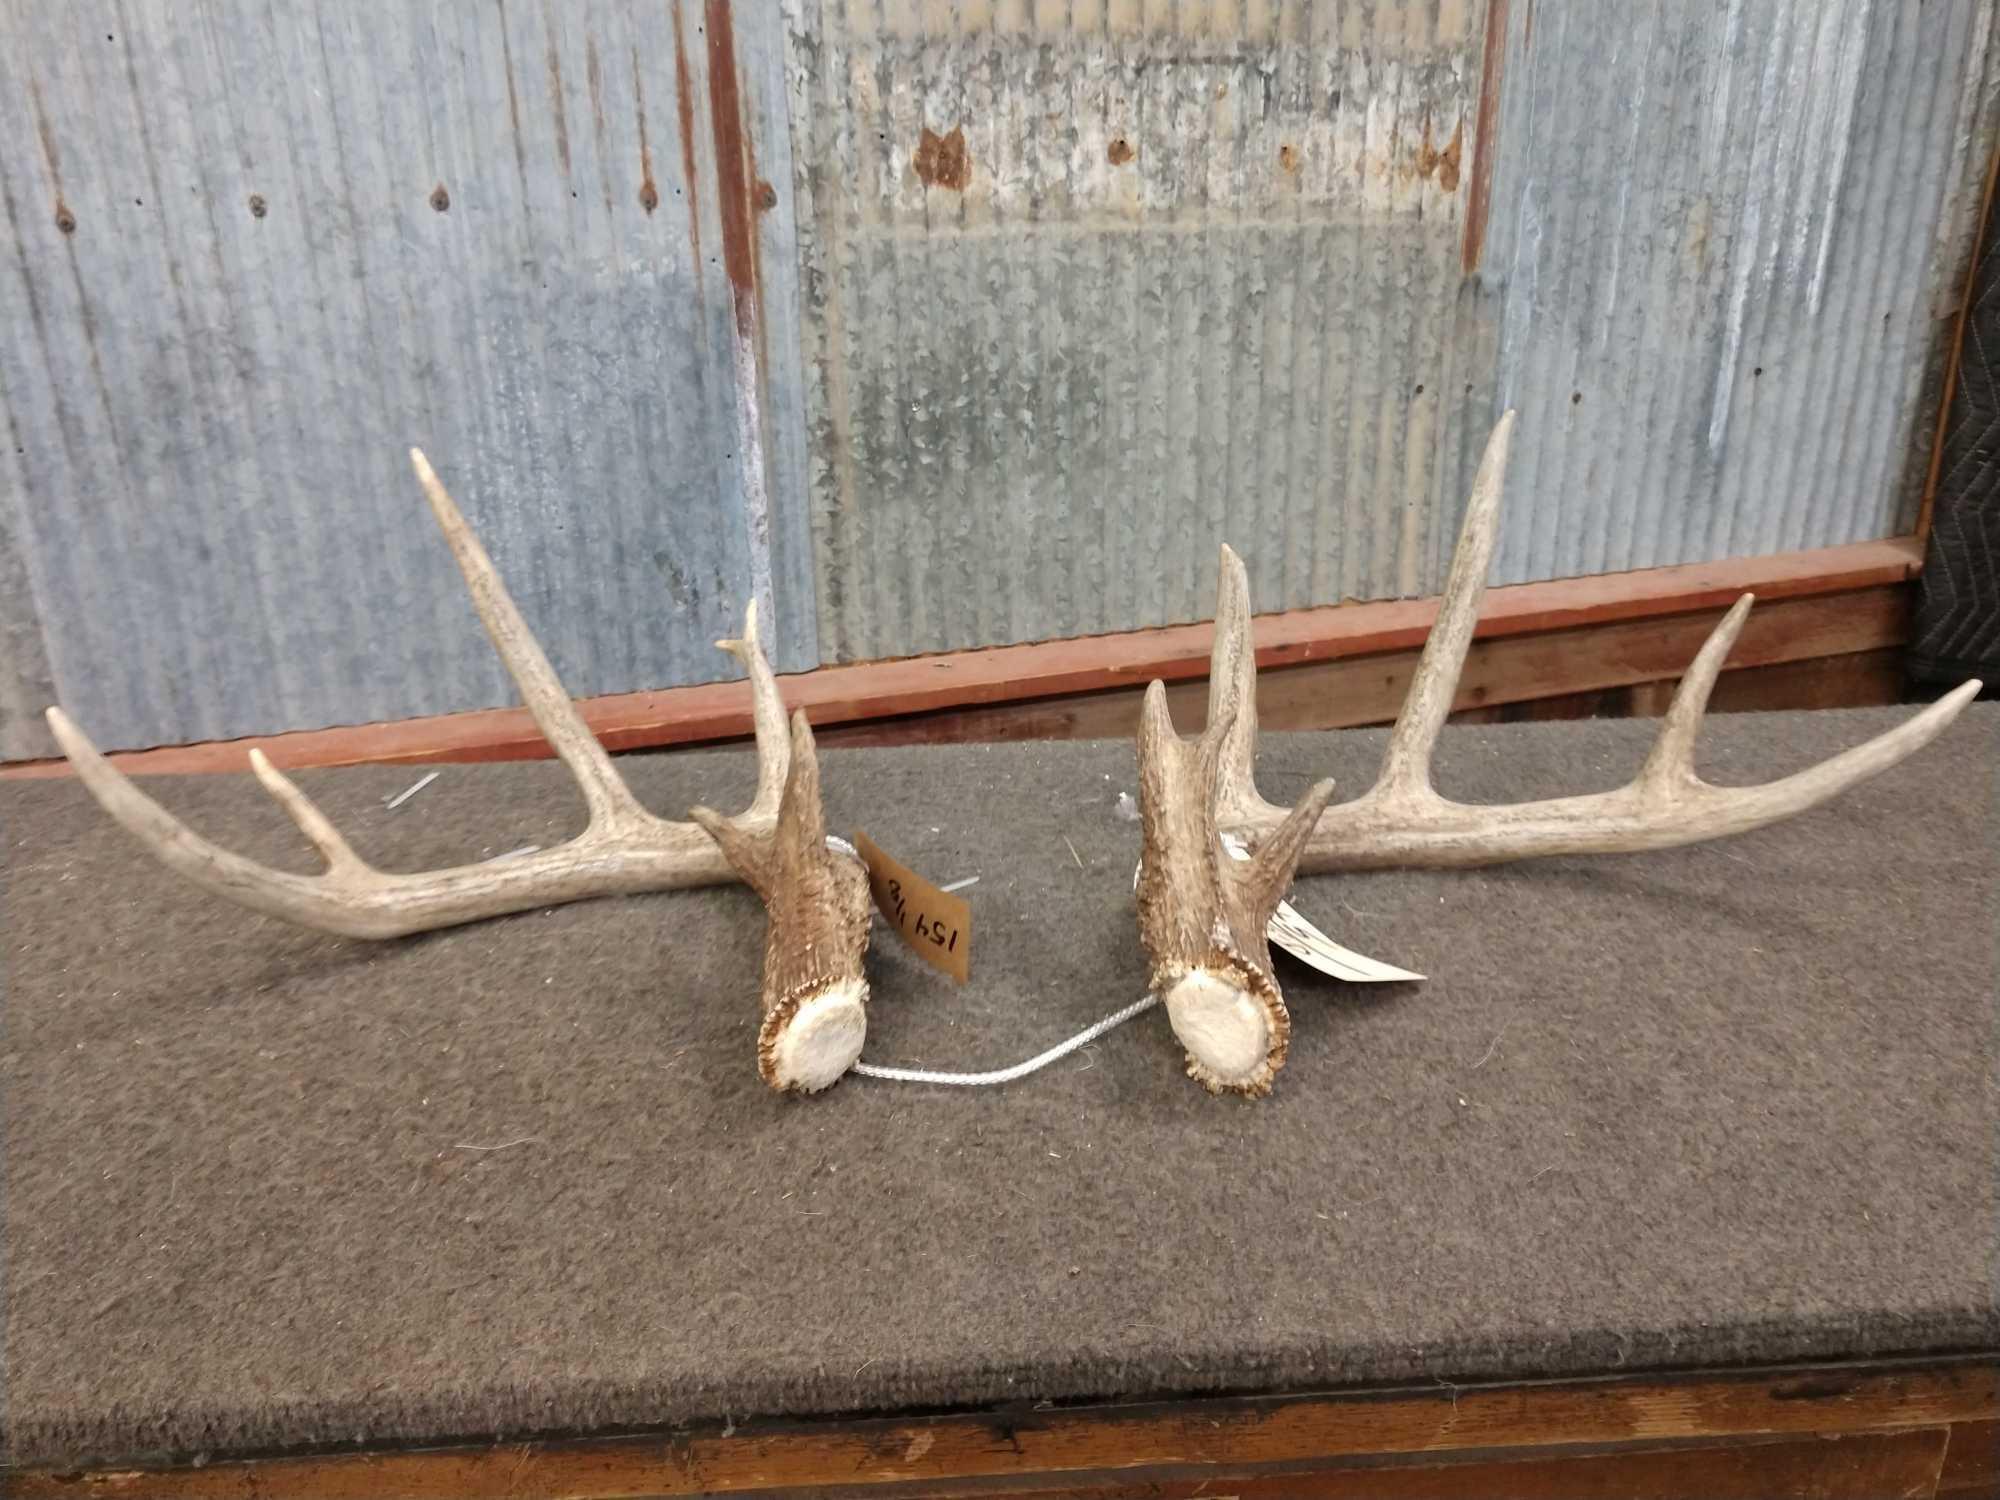 154 1/8" Wild Whitetail Shed Antlers